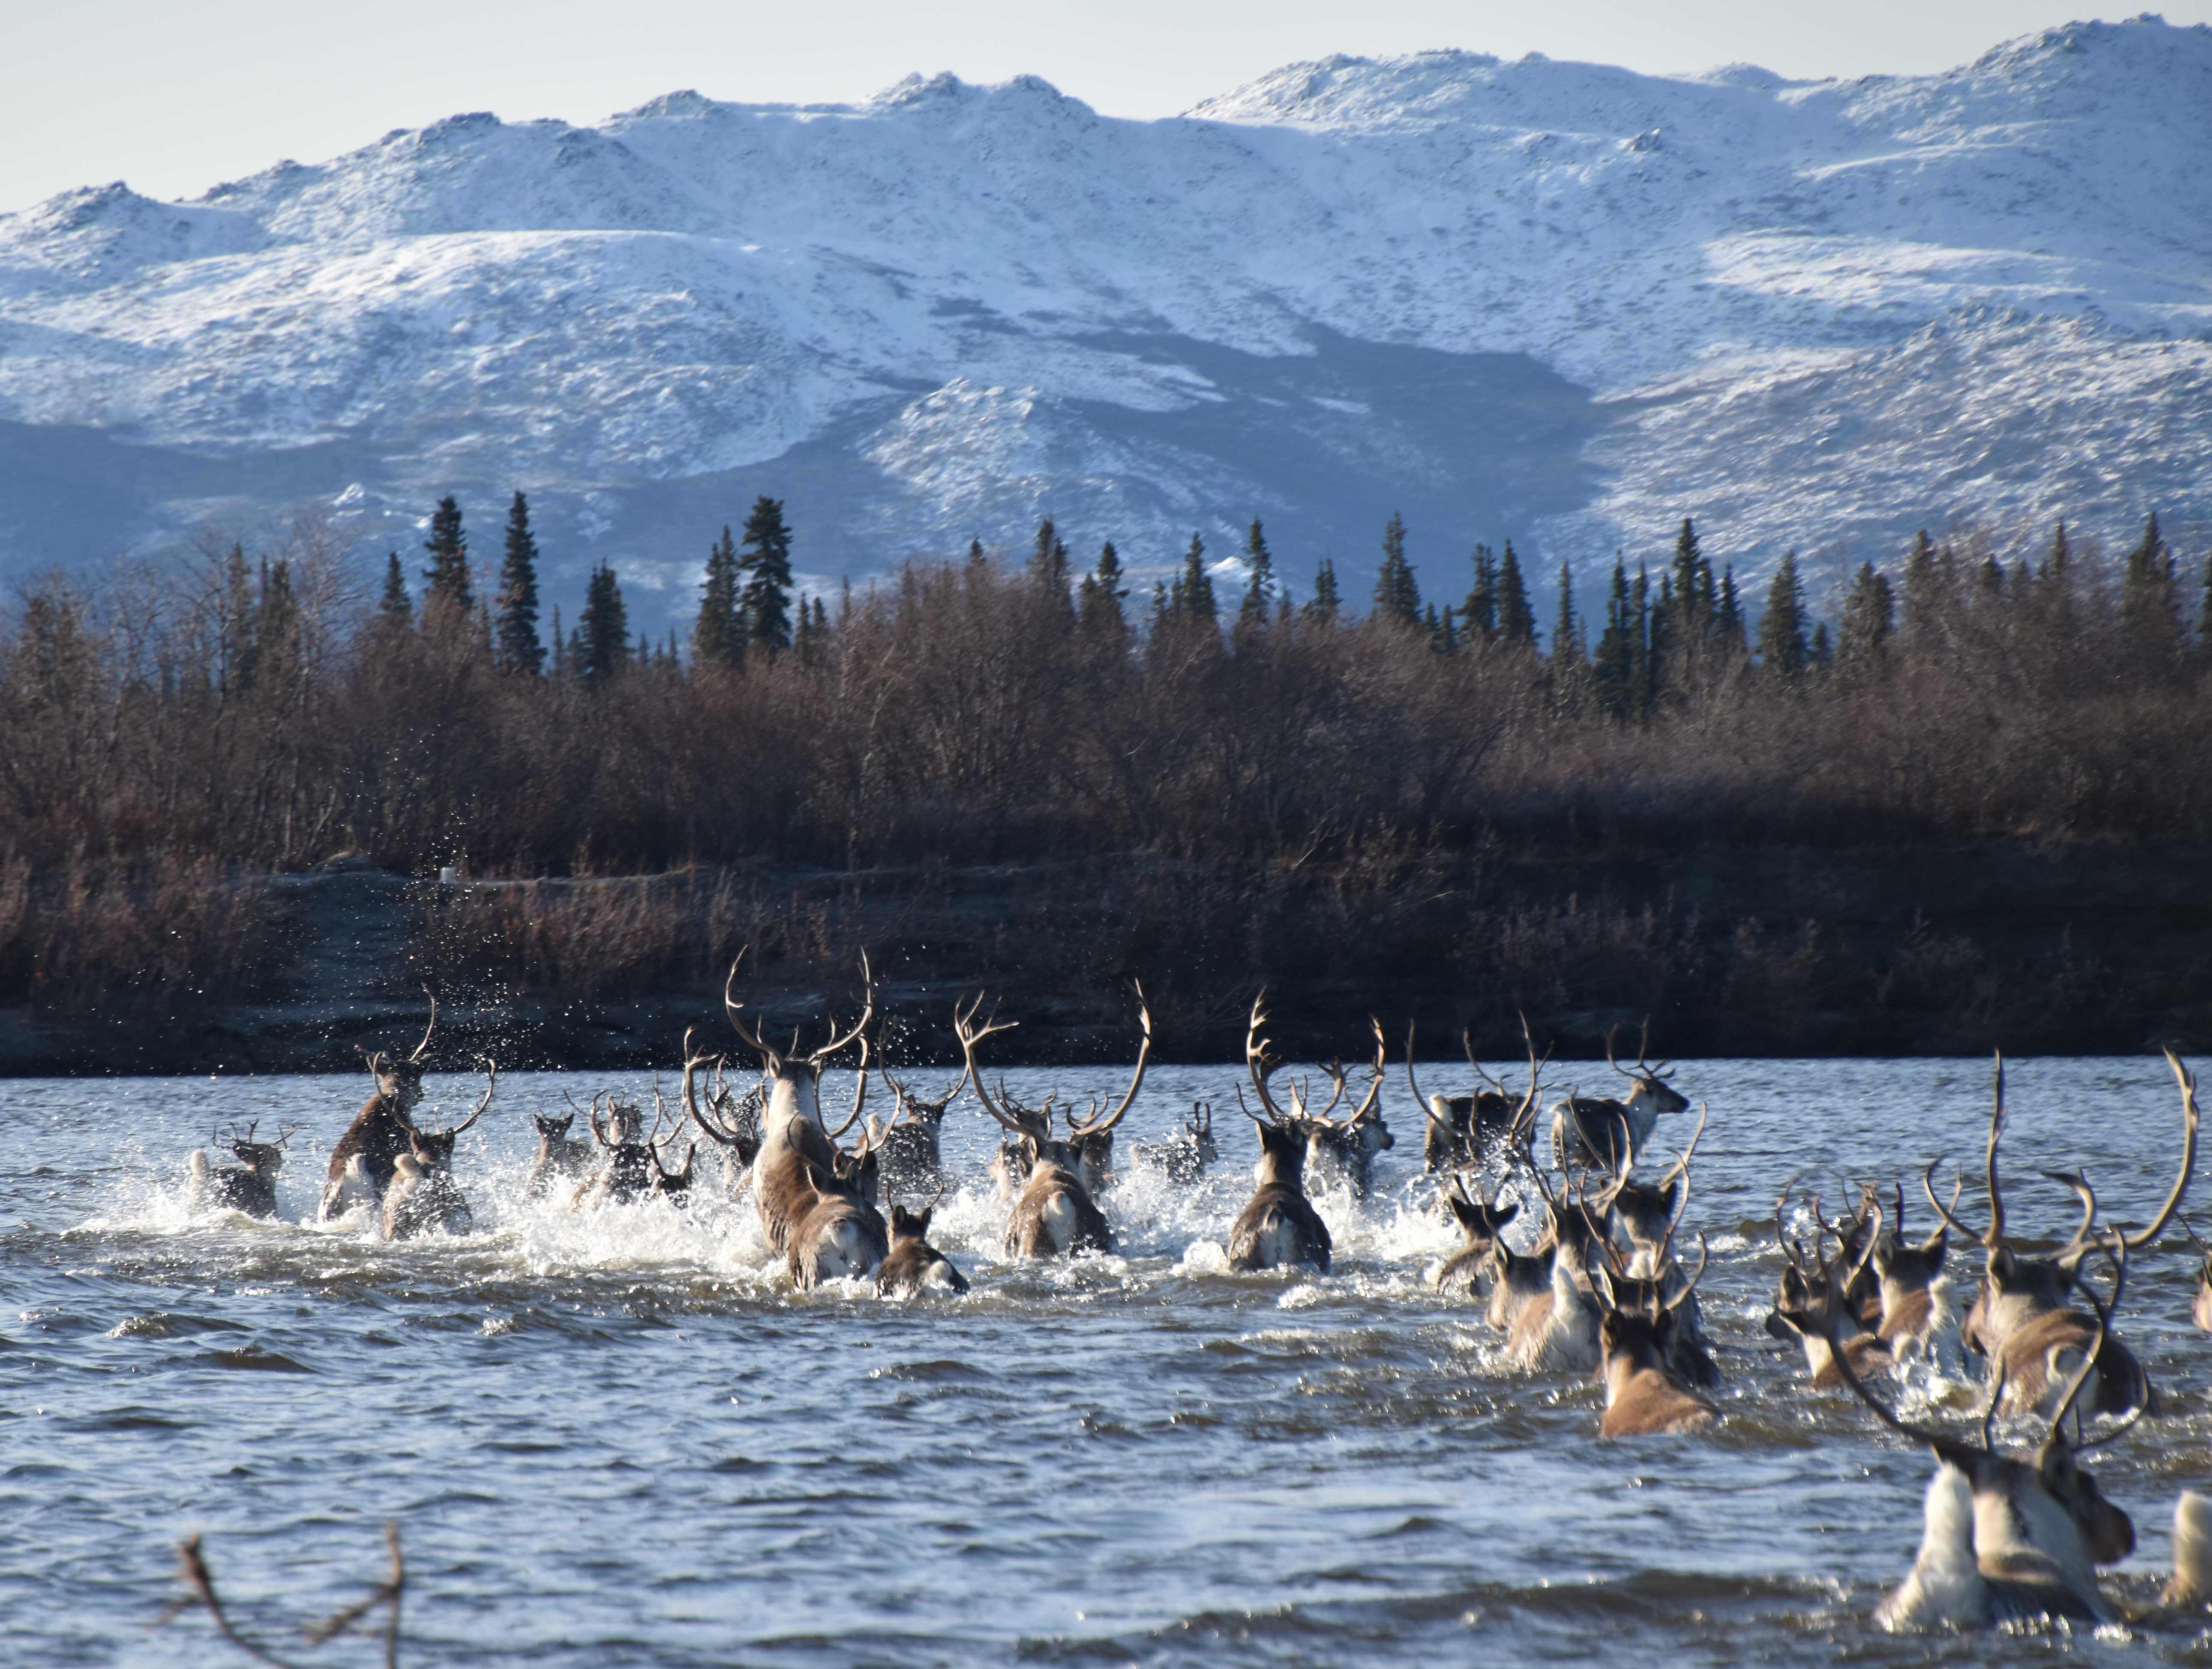 Caribou have the longest terrestrial migrations in the world, with the round-trip distances exceeding 745 miles. Photo courtesy of NPS/Kyle Joly (Click image to download hi-res version.)